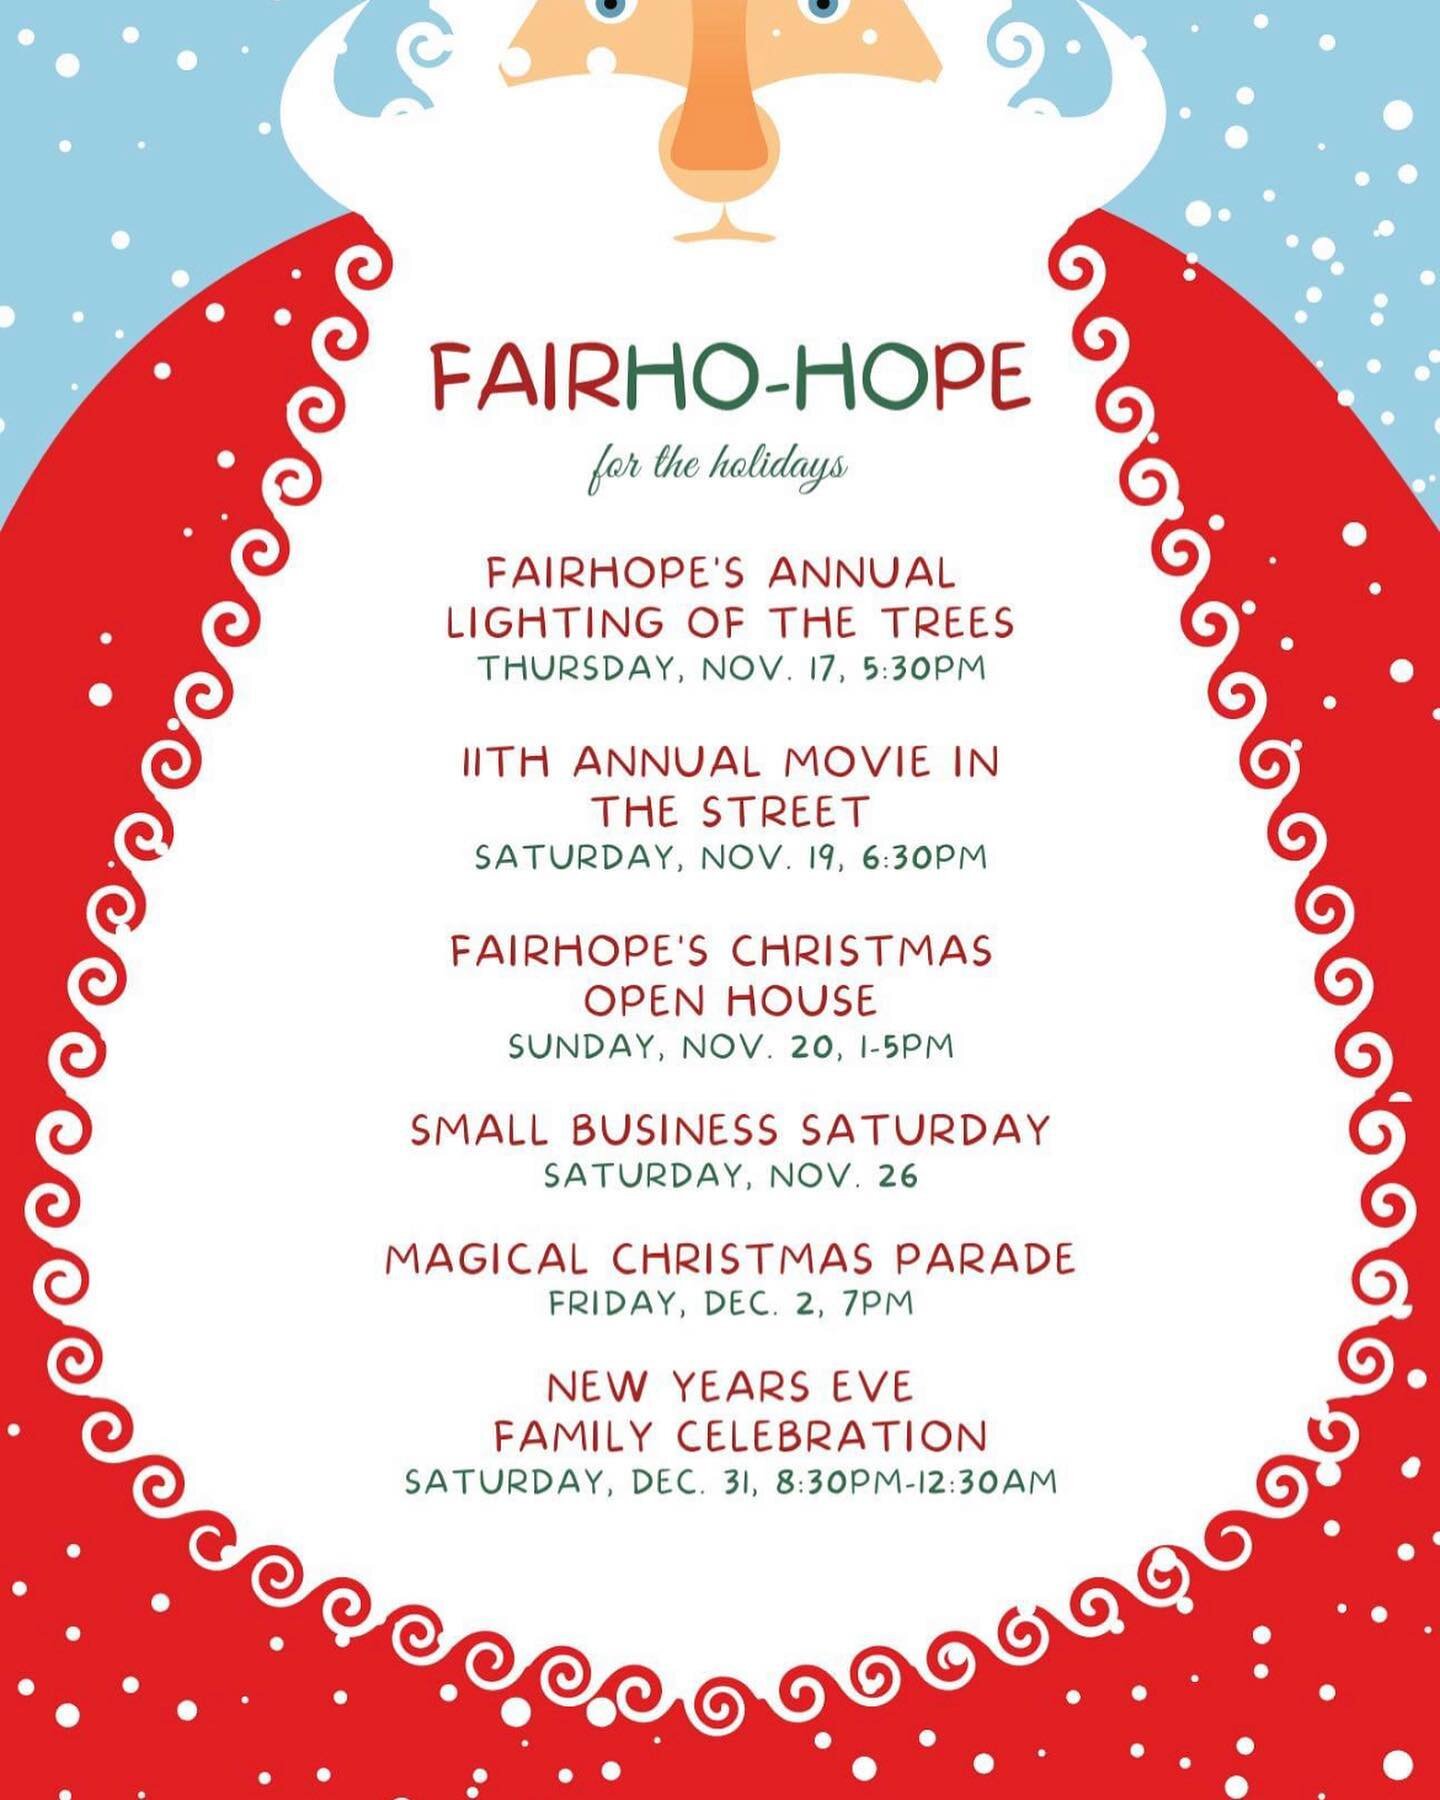 Who else is ready for Fairhope Holiday season? Take note of all the fun events coming up in our beautiful city!